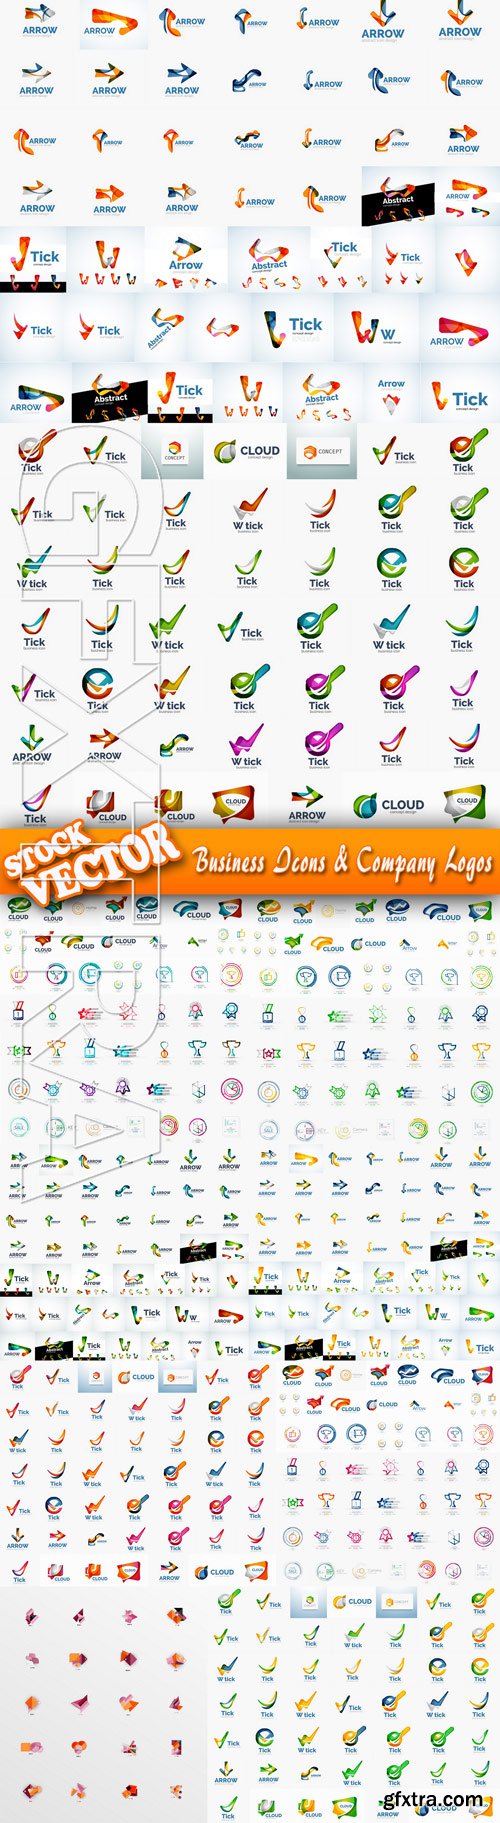 Stock Vector - Business Icons & Company Logos